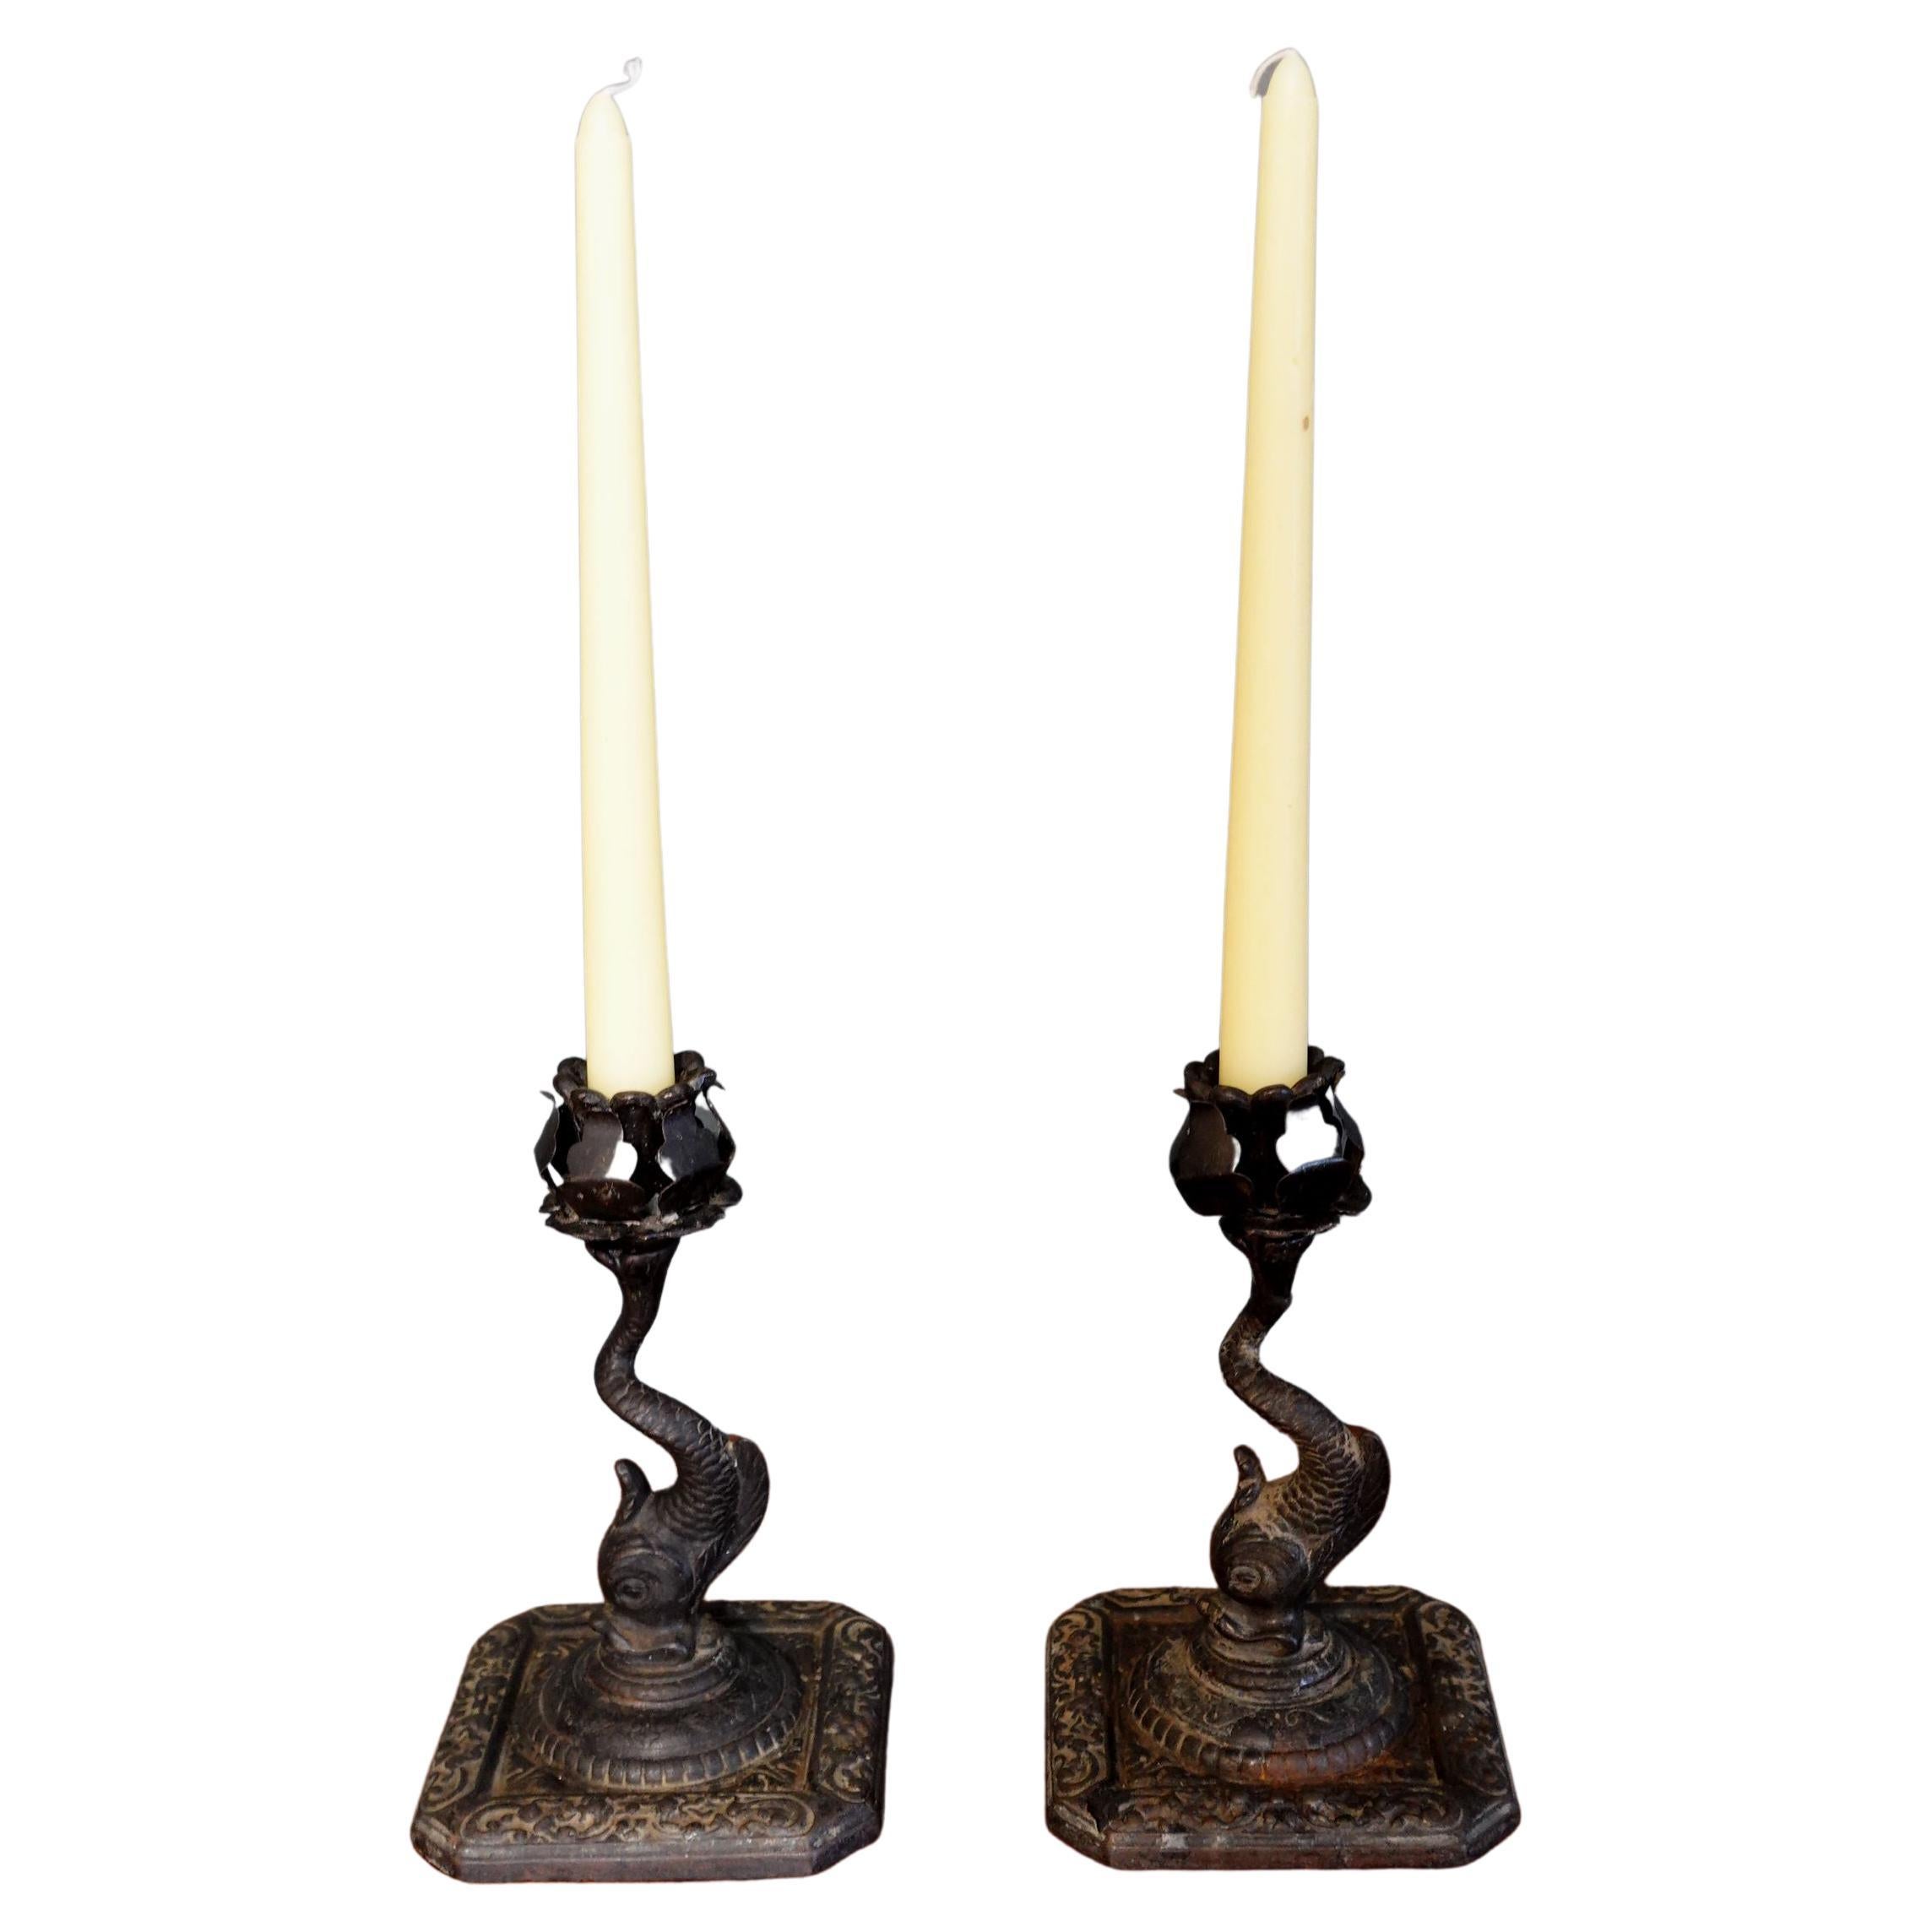 Vantage Pair of Rought Iron Candlesticks For Sale